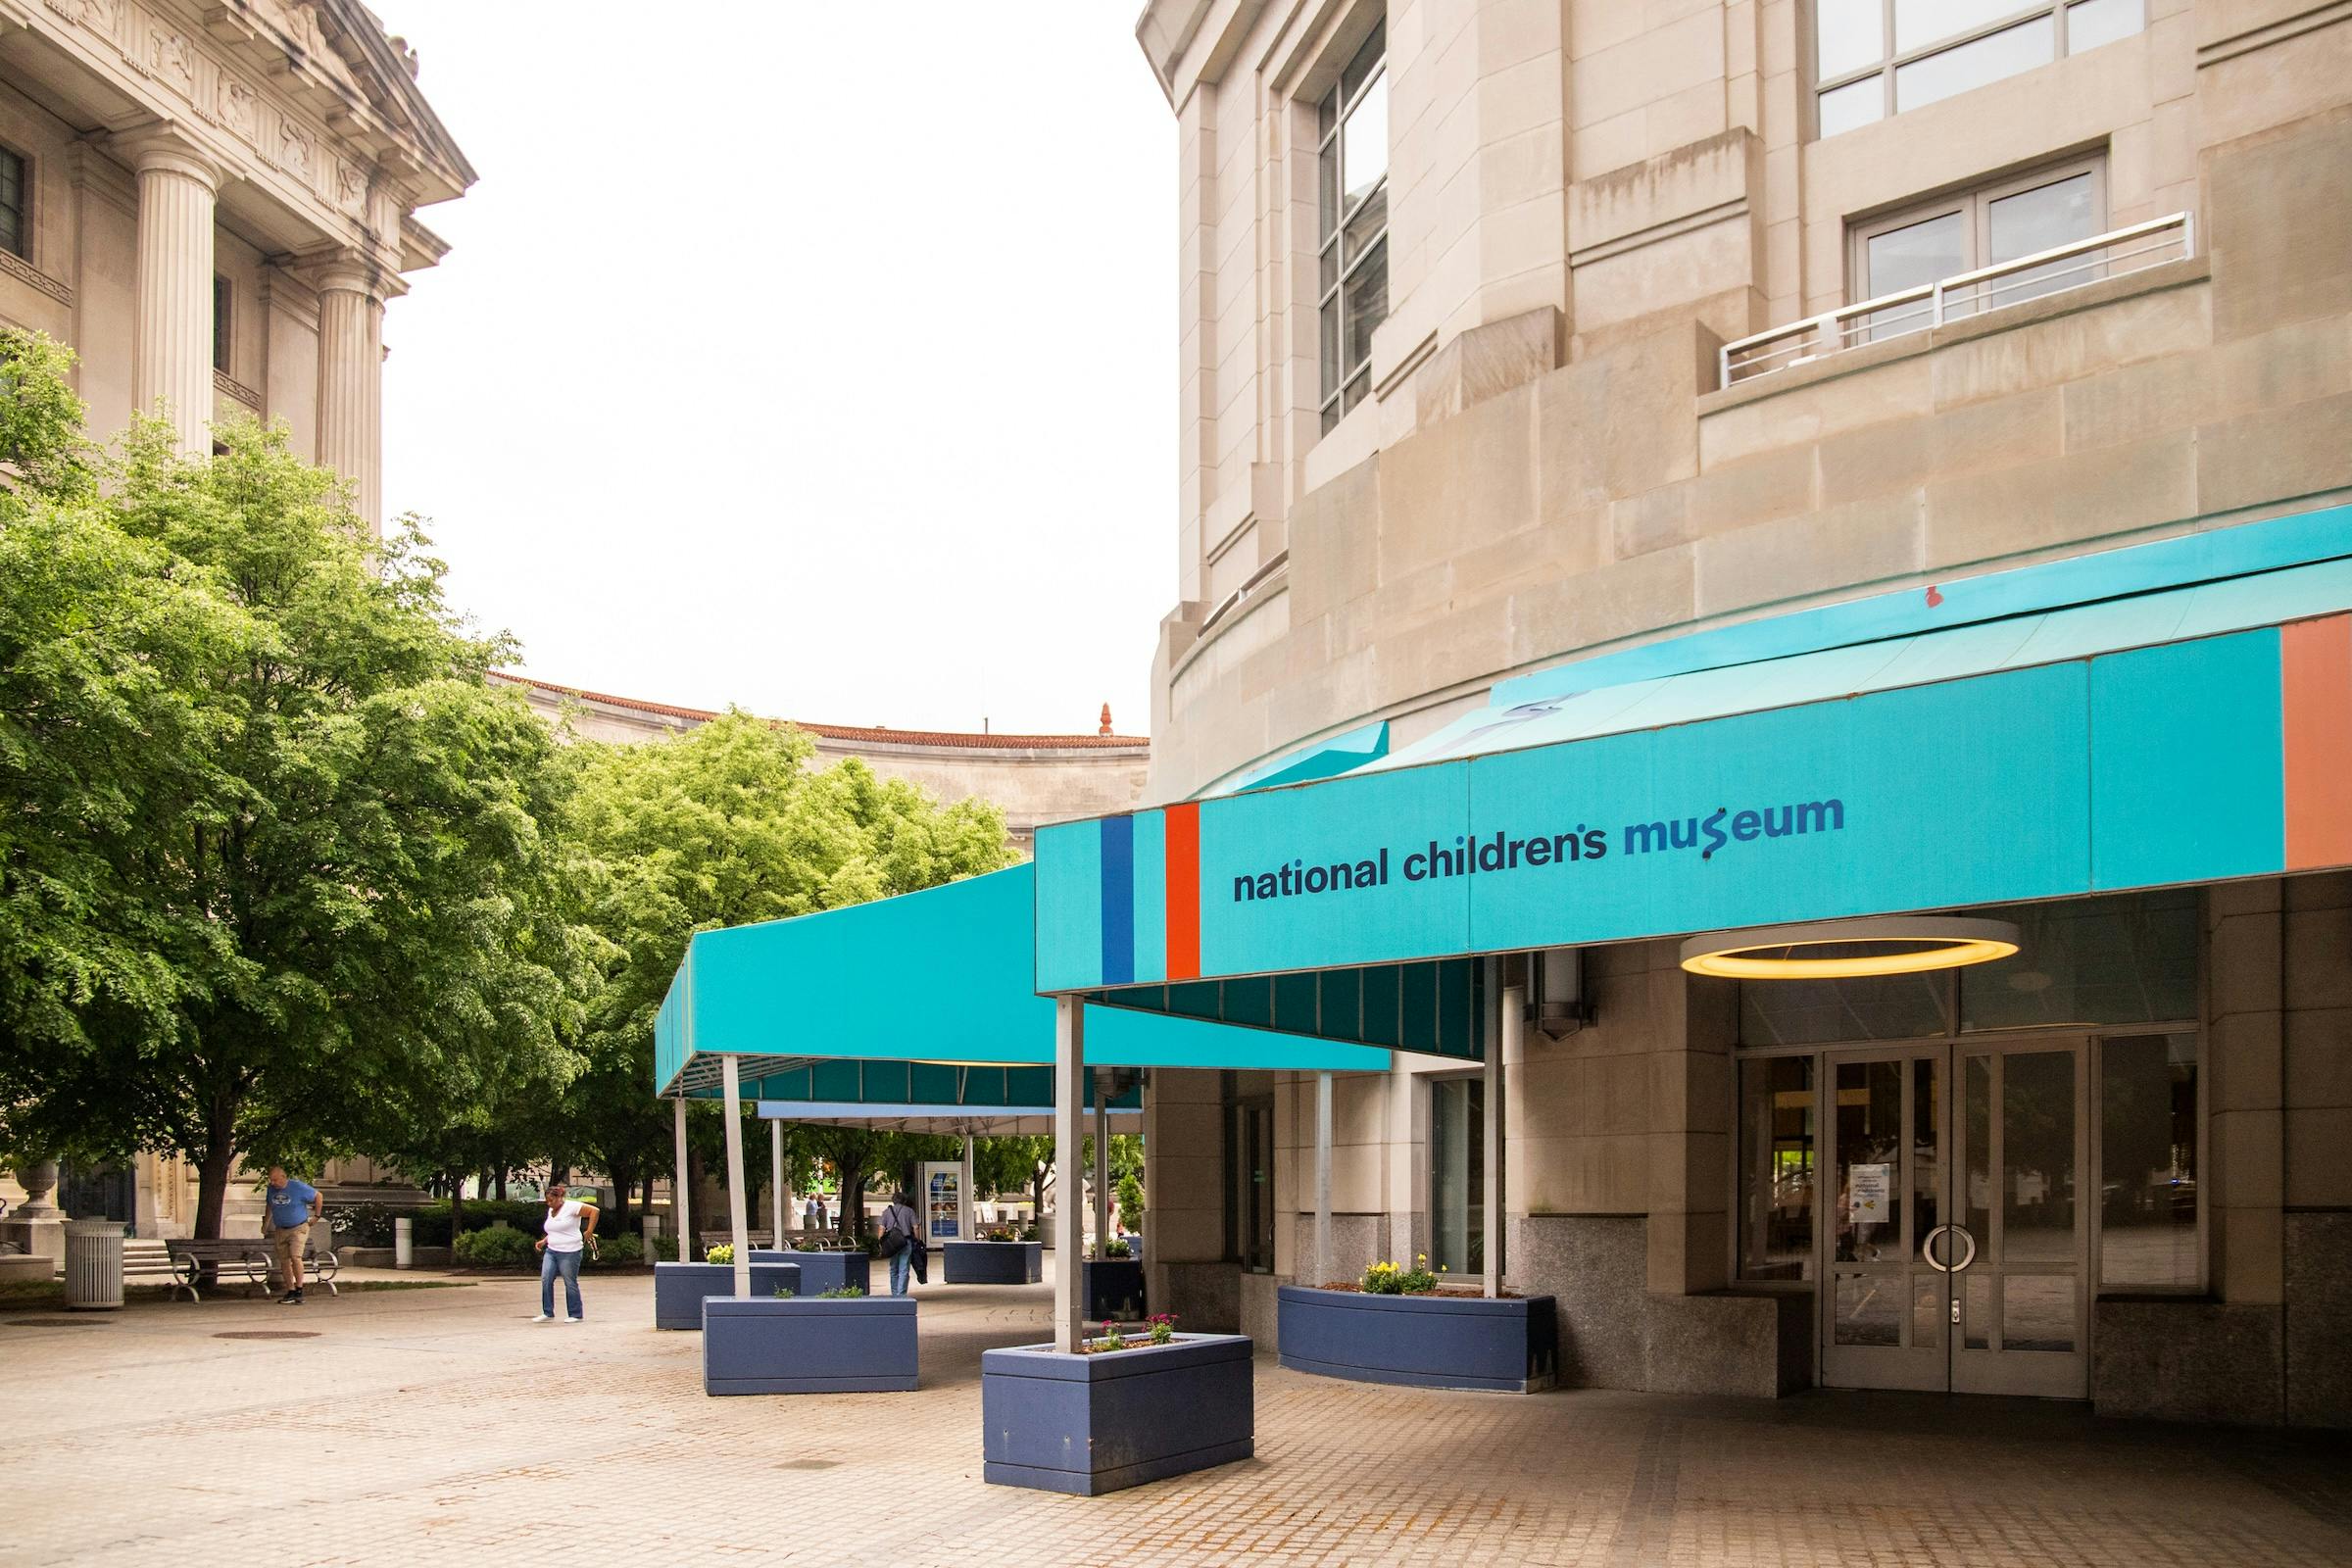 Exterior shot of the Museum's outdoor awnings